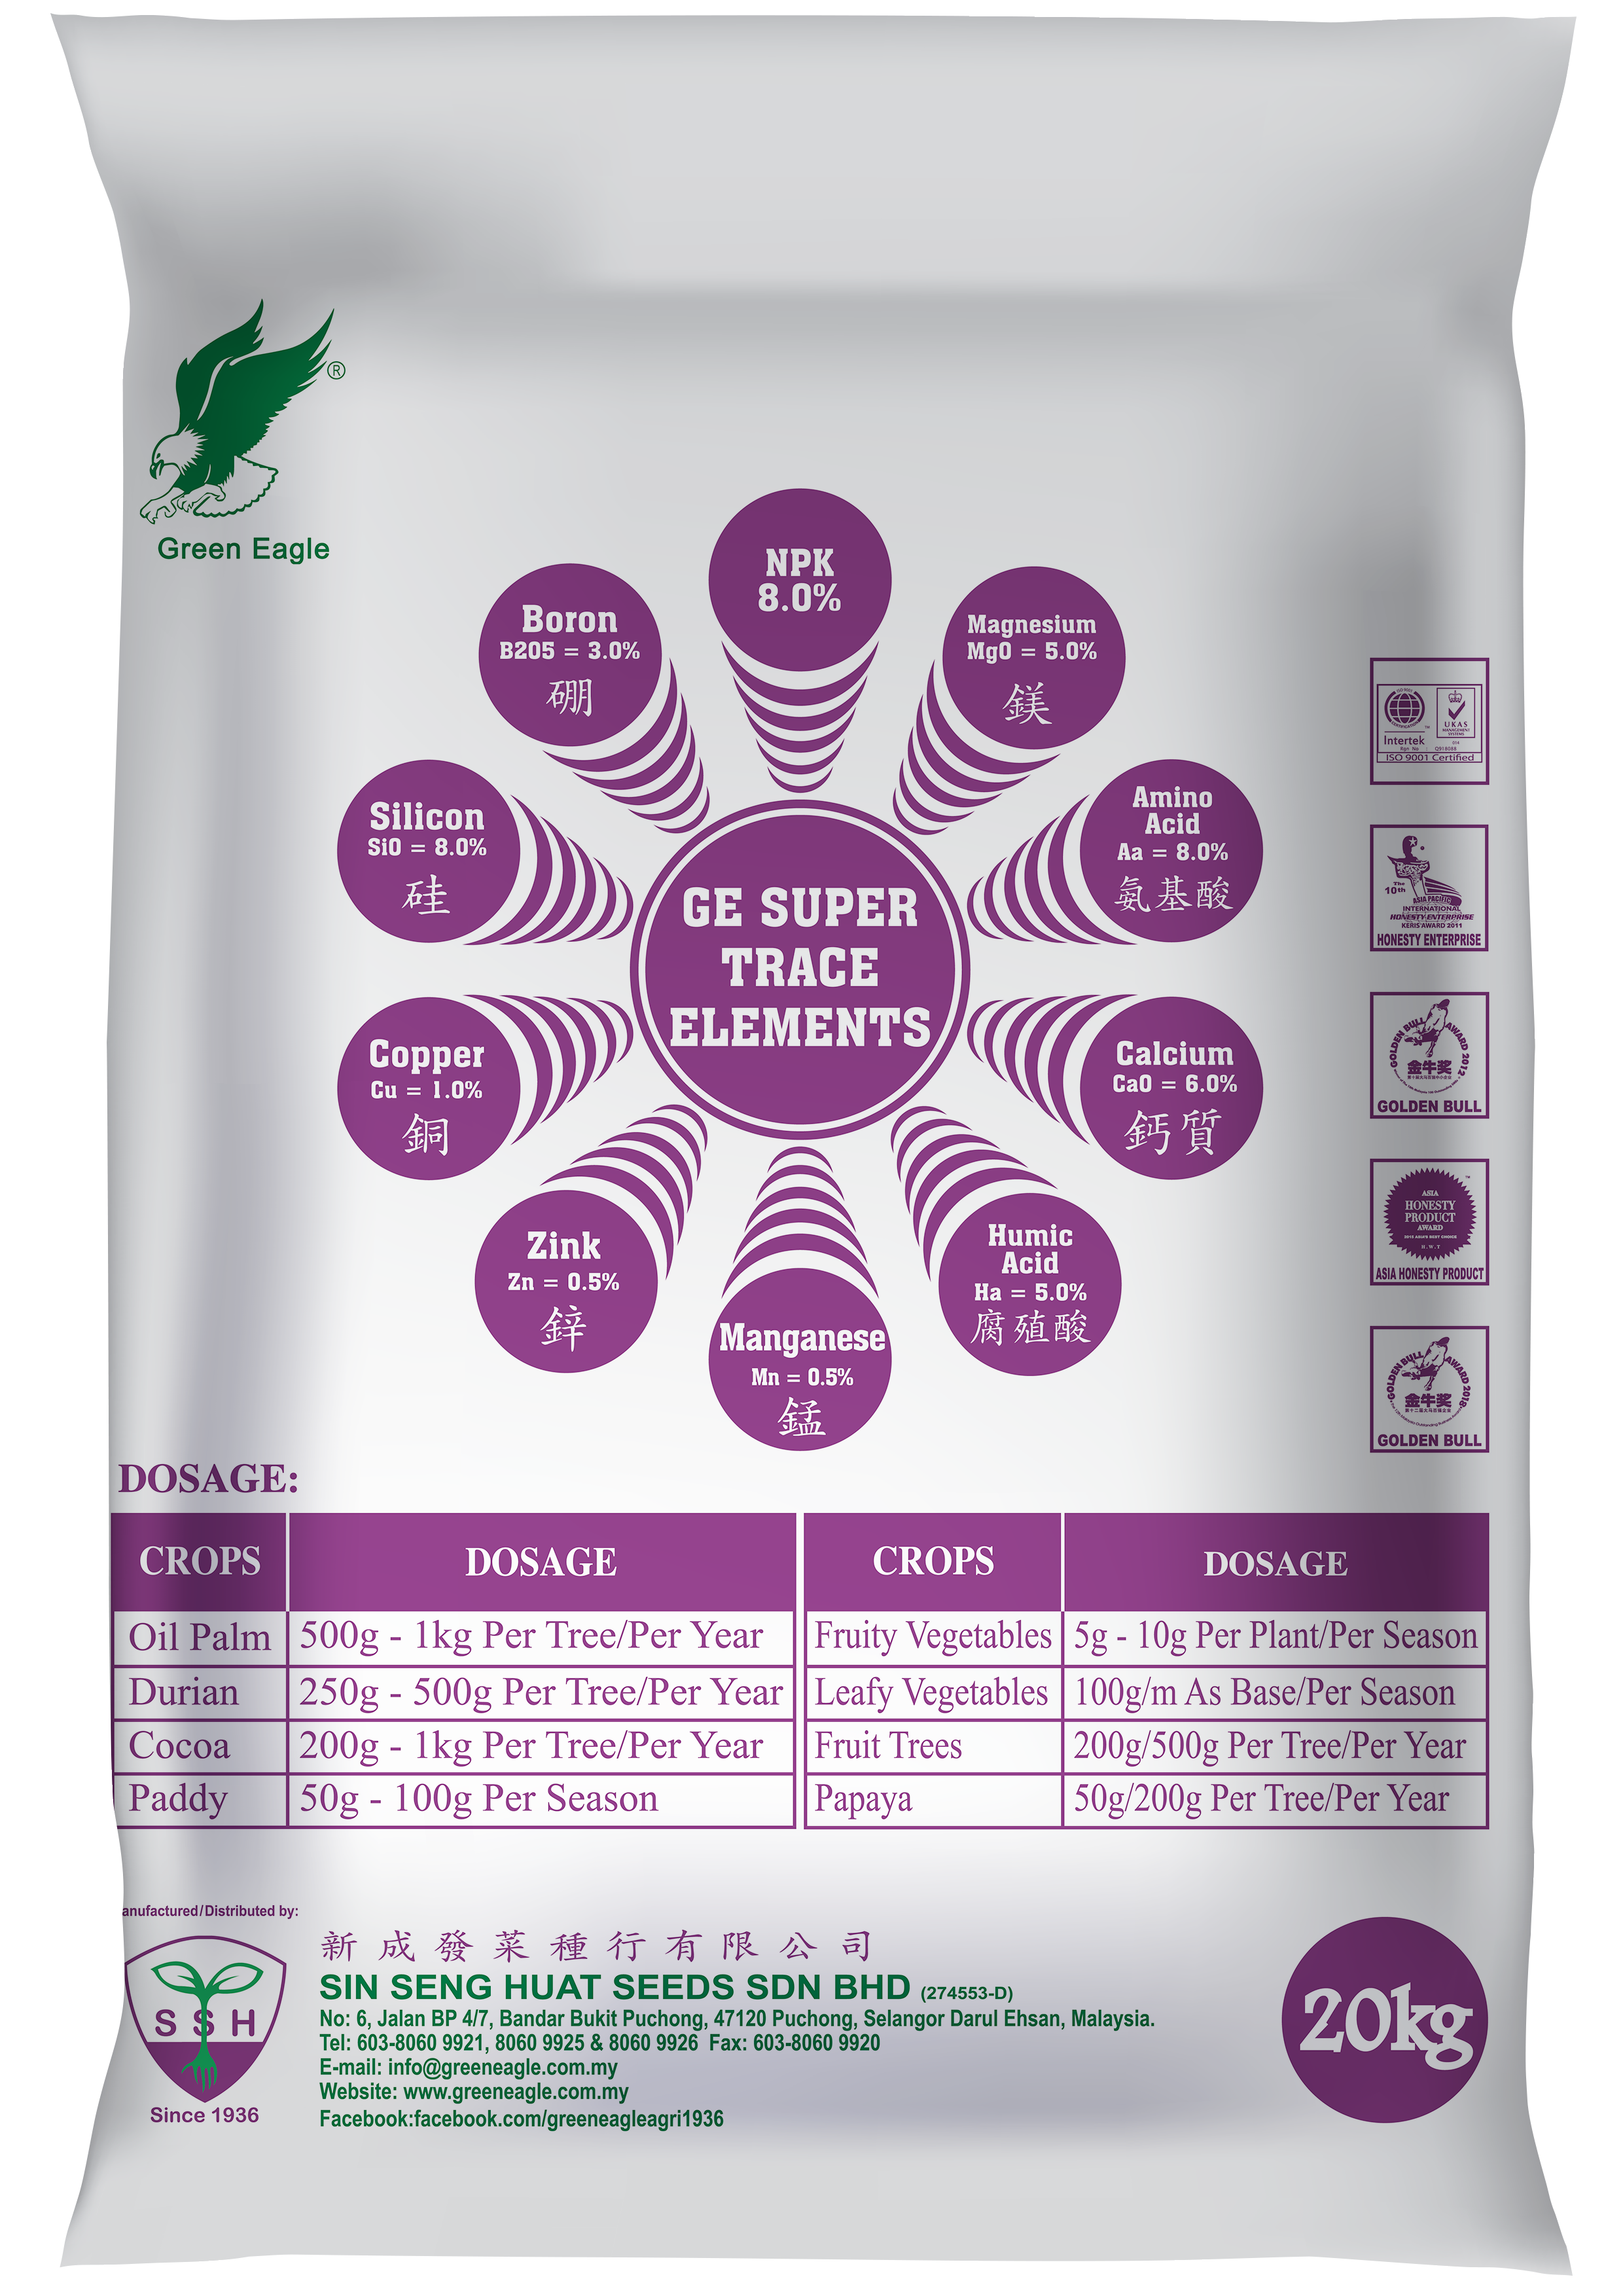 GE Super Trace Elements bag design (use this)